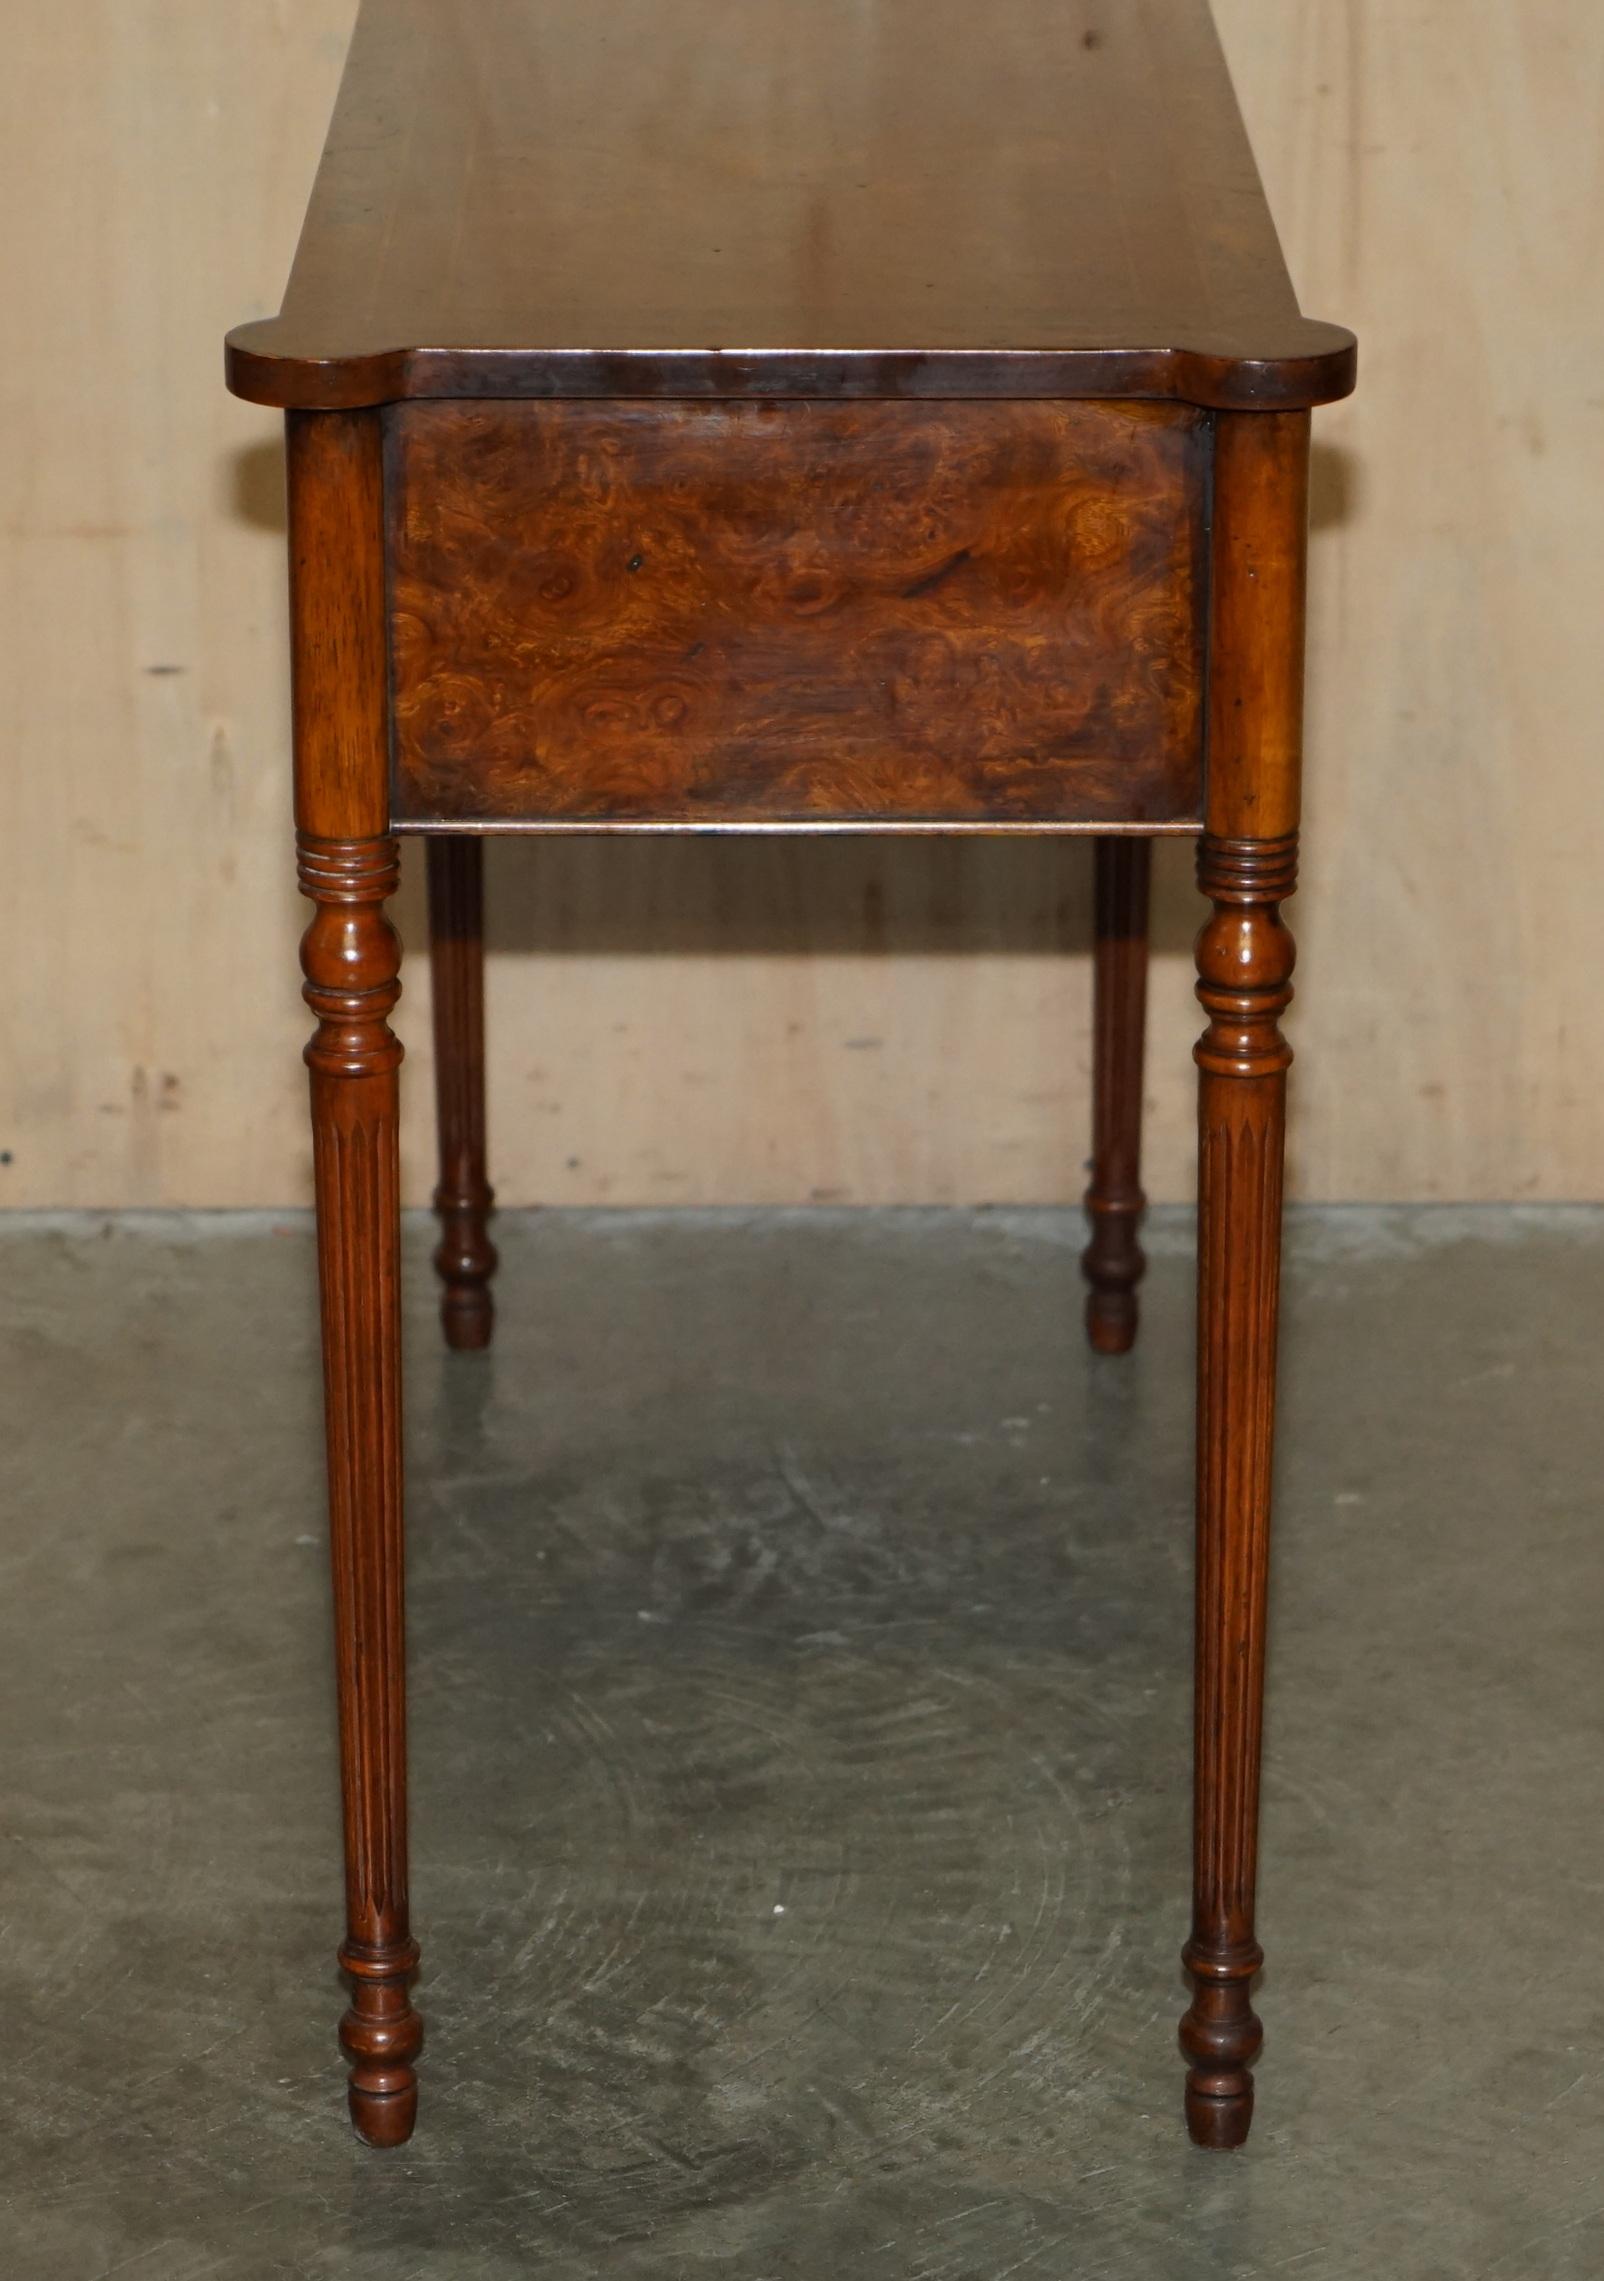 EXQUISITE CIRCA 1920 BURR ELM & SATiNWOOD FRENCH POLISHED RESTORED CONSOLE TABLE For Sale 9